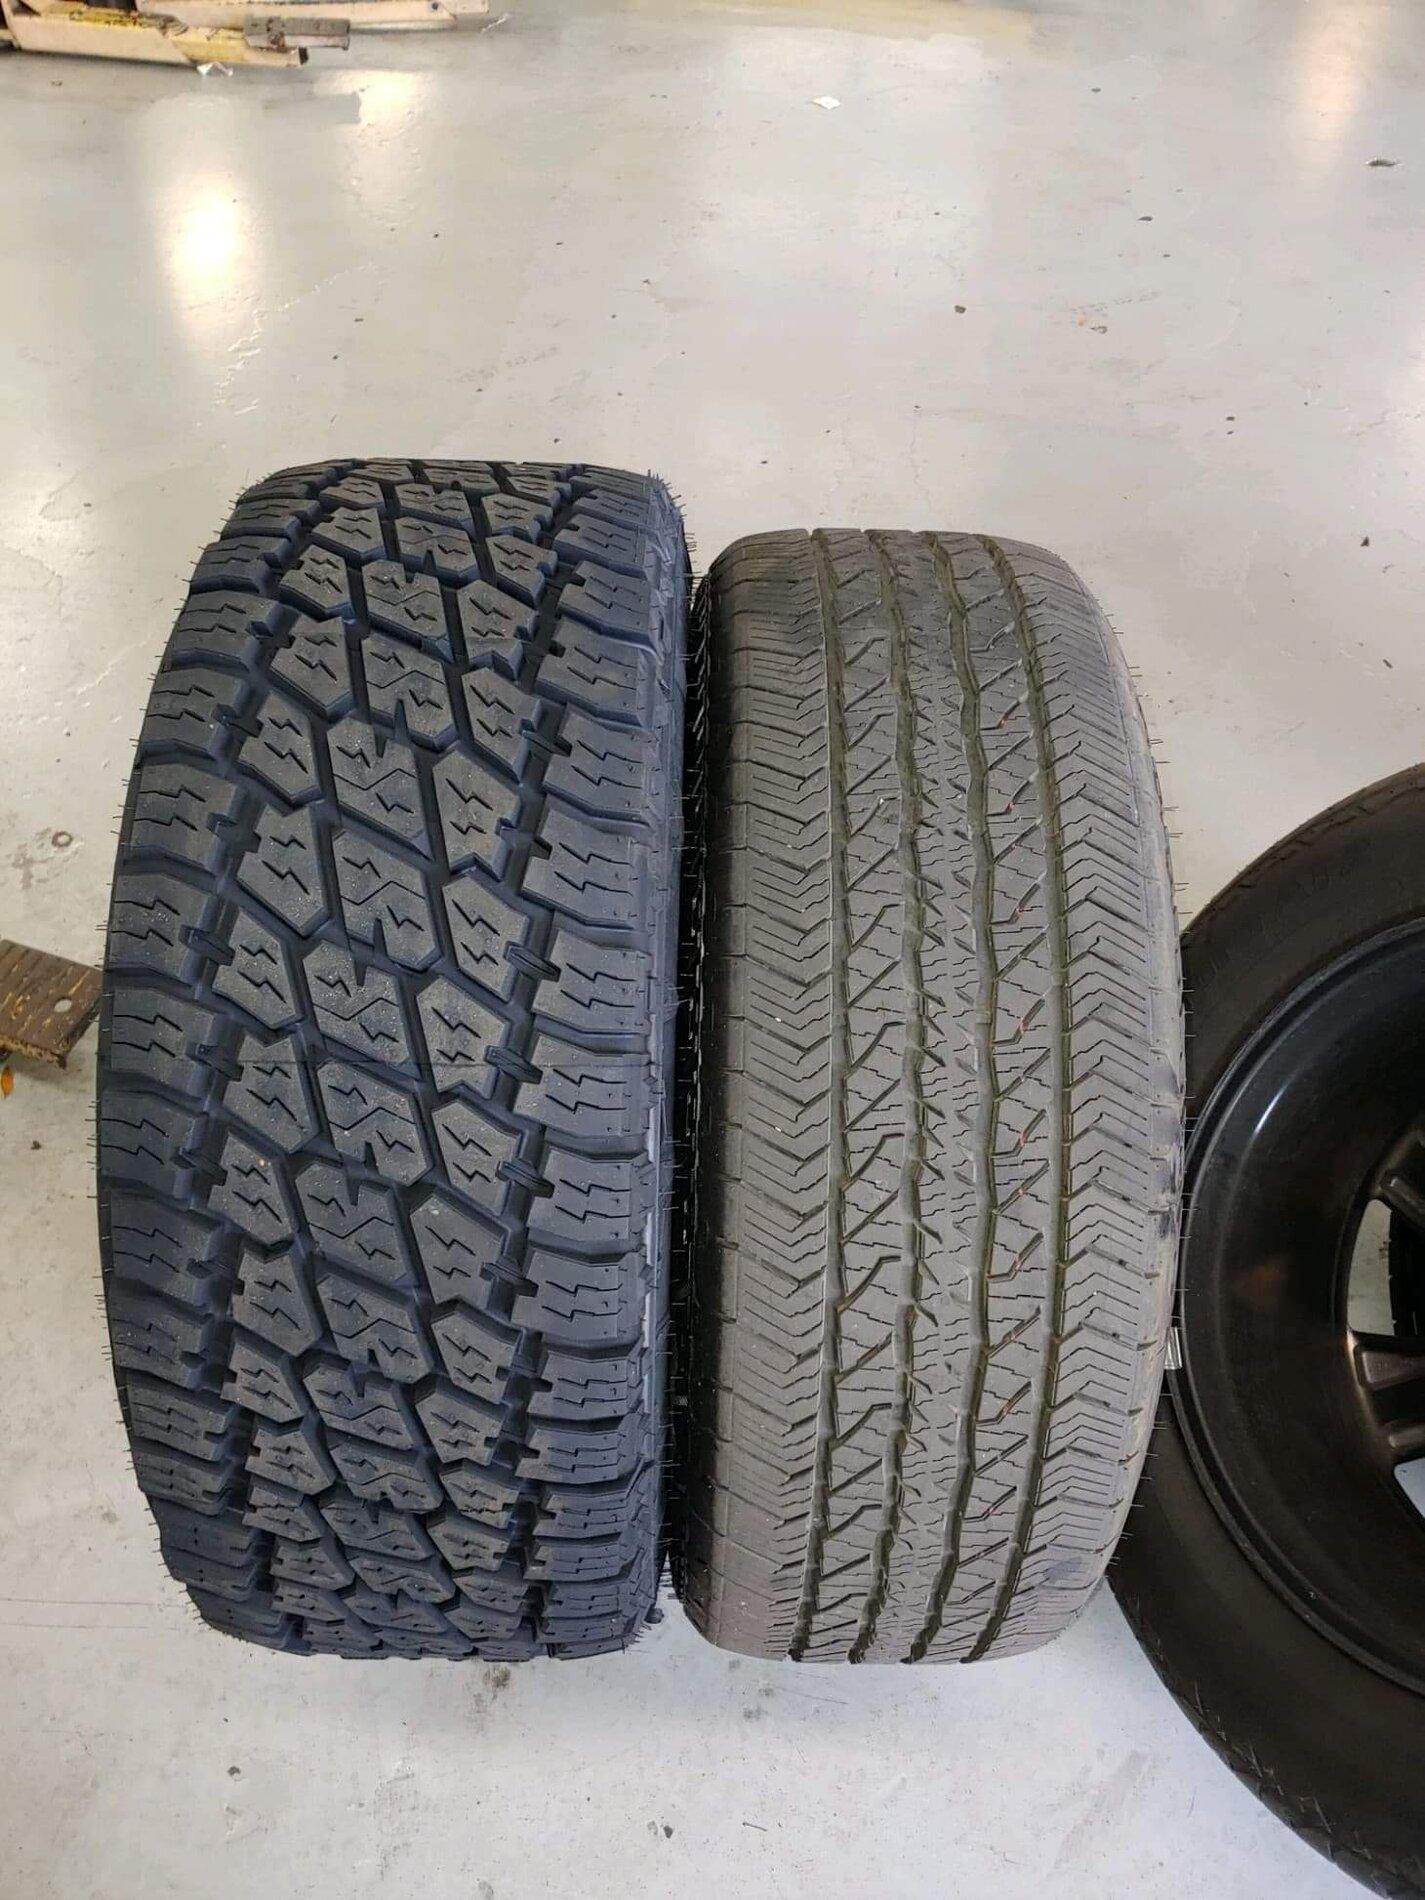 Ford F-150 Lightning 275/65/20 Nitto Ridge Grappler VS 295/60/20 Terra Grappler side by side visual comparison. received_277179610620910